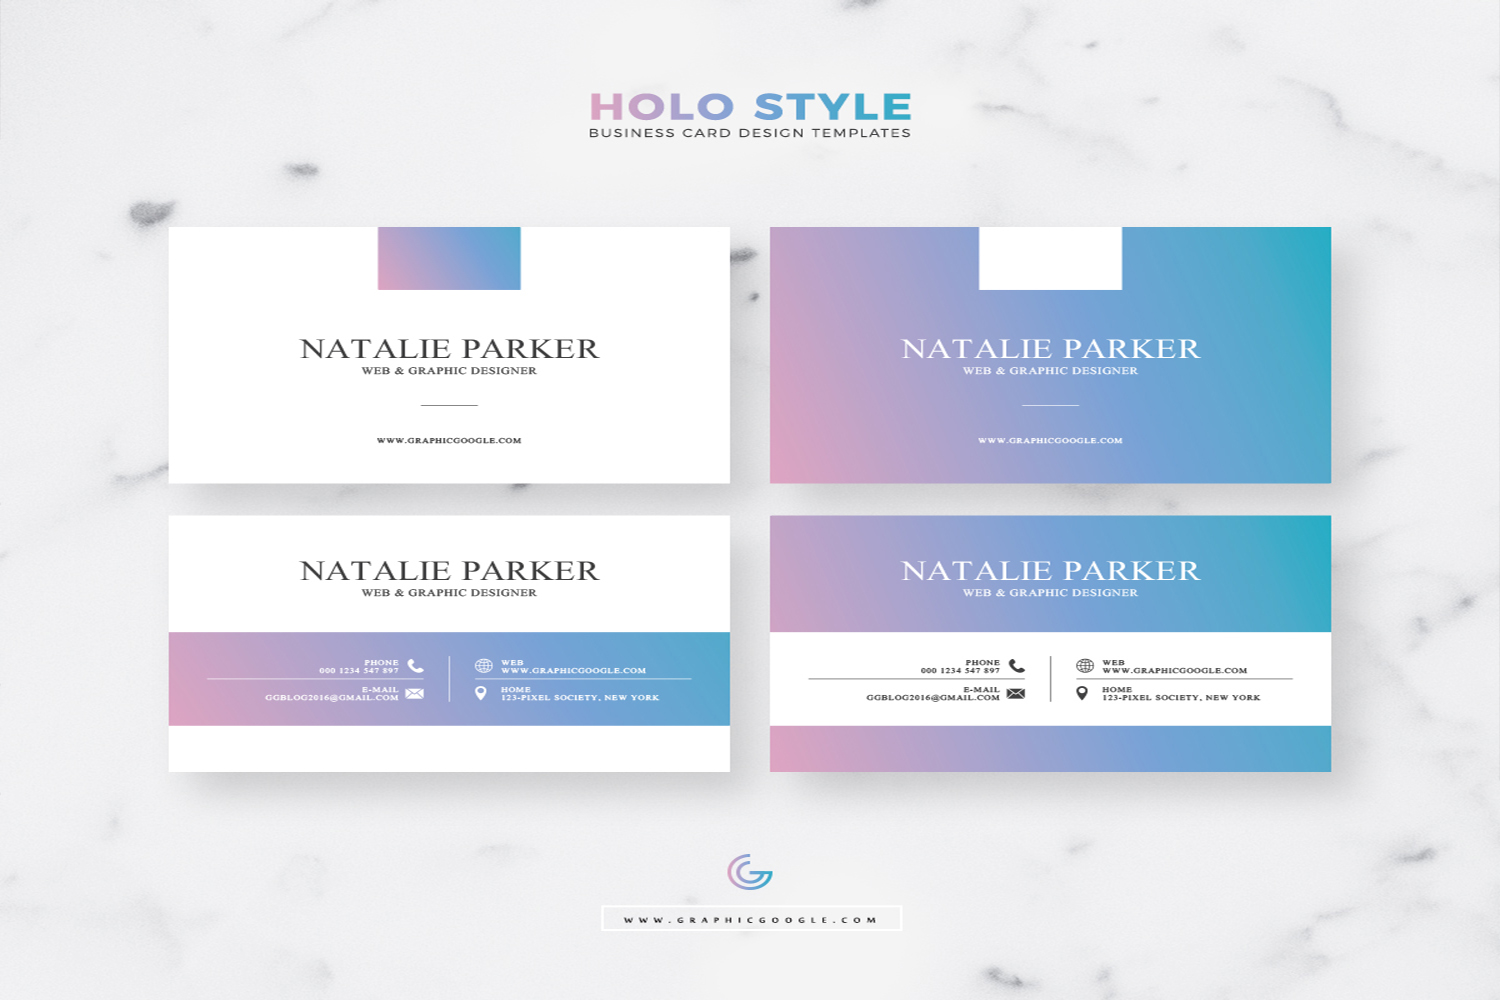 Modern Holo Style Business Card Design Templates 2018 Free Download